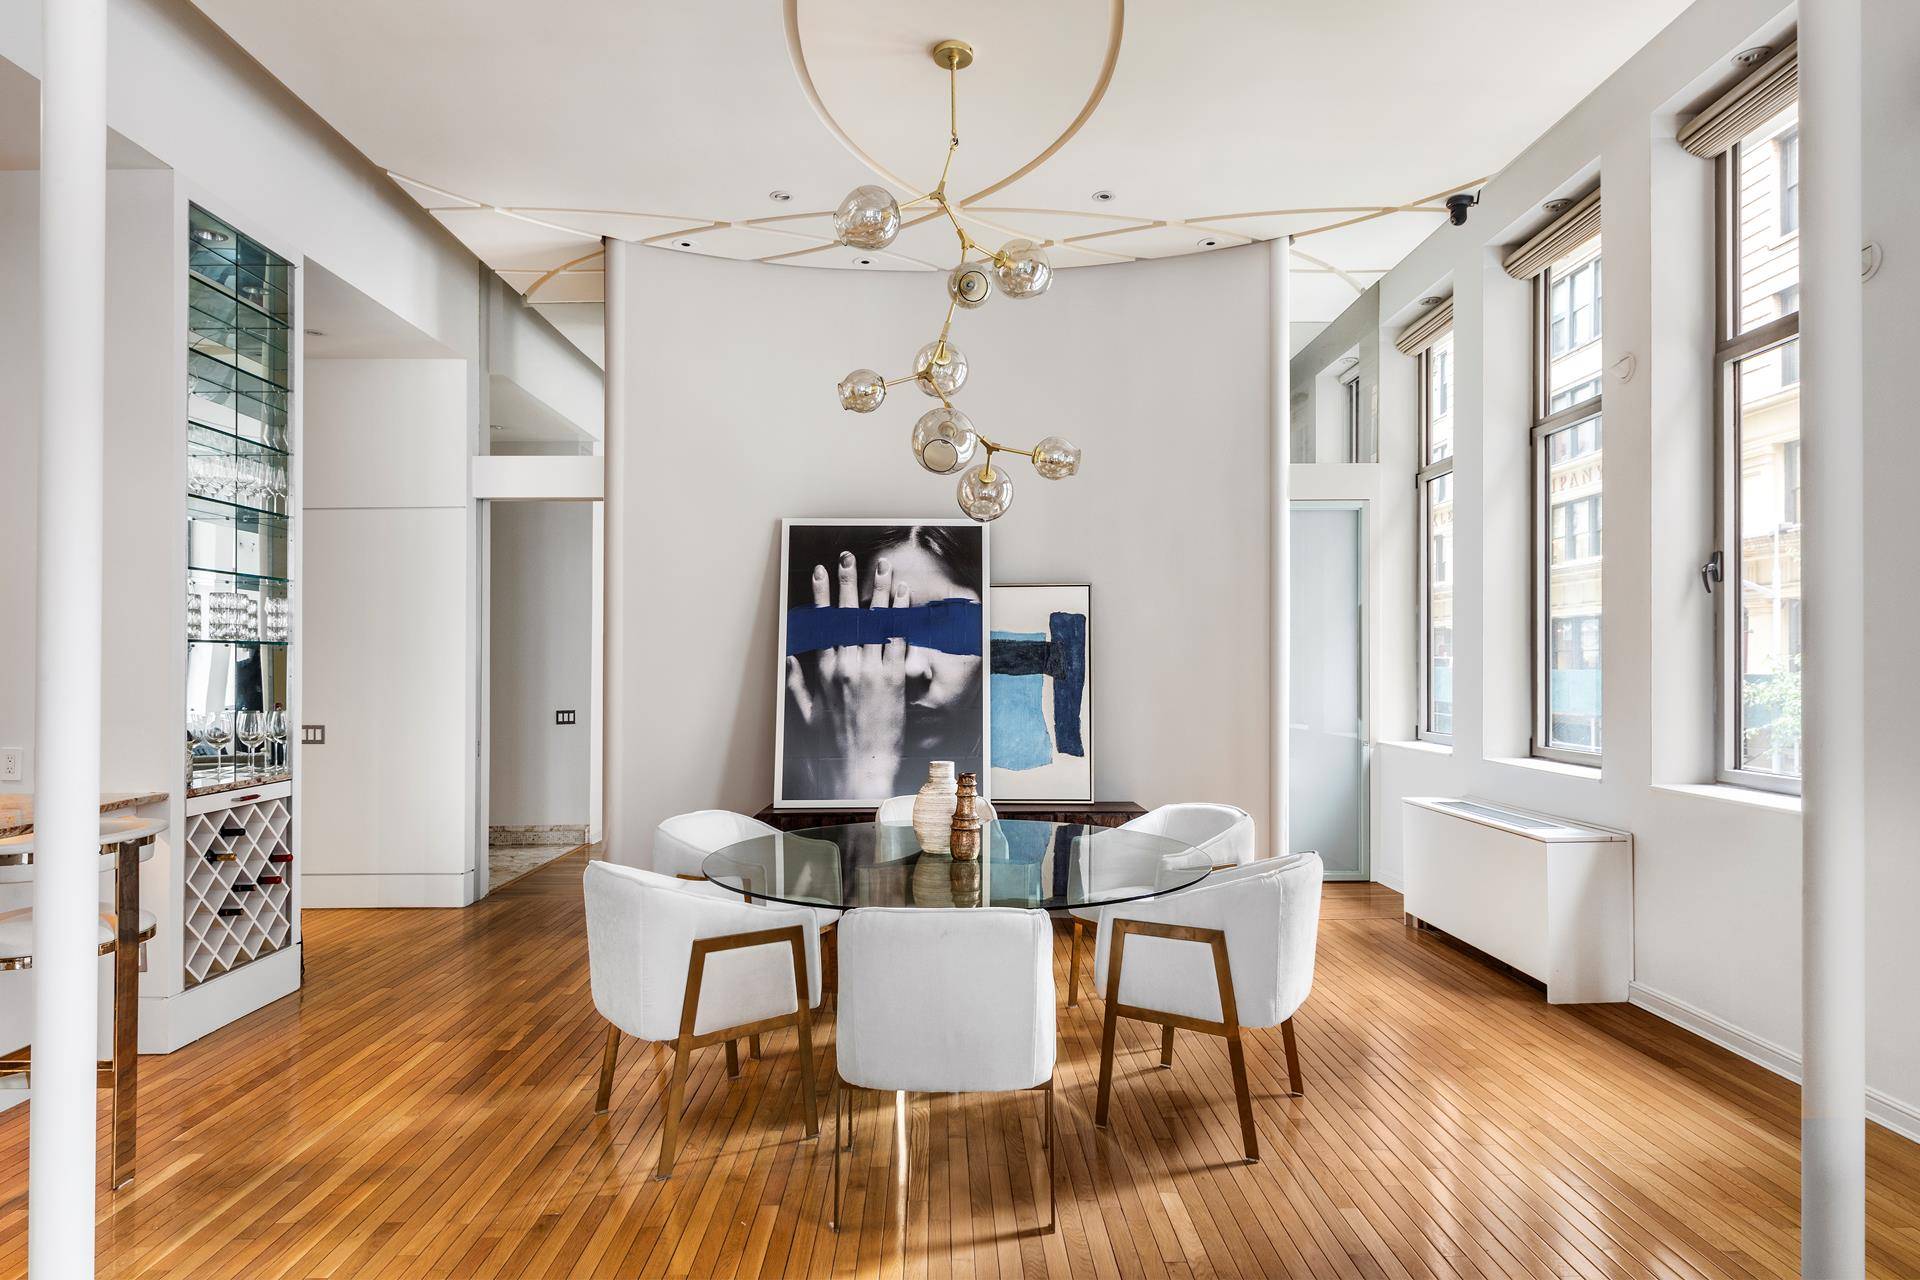 This spectacular 3 bedroom loft currently configured as a two beds is located in the Chelsea Mercantile, one of the most desirable prewar condominiums in the neighborhood.